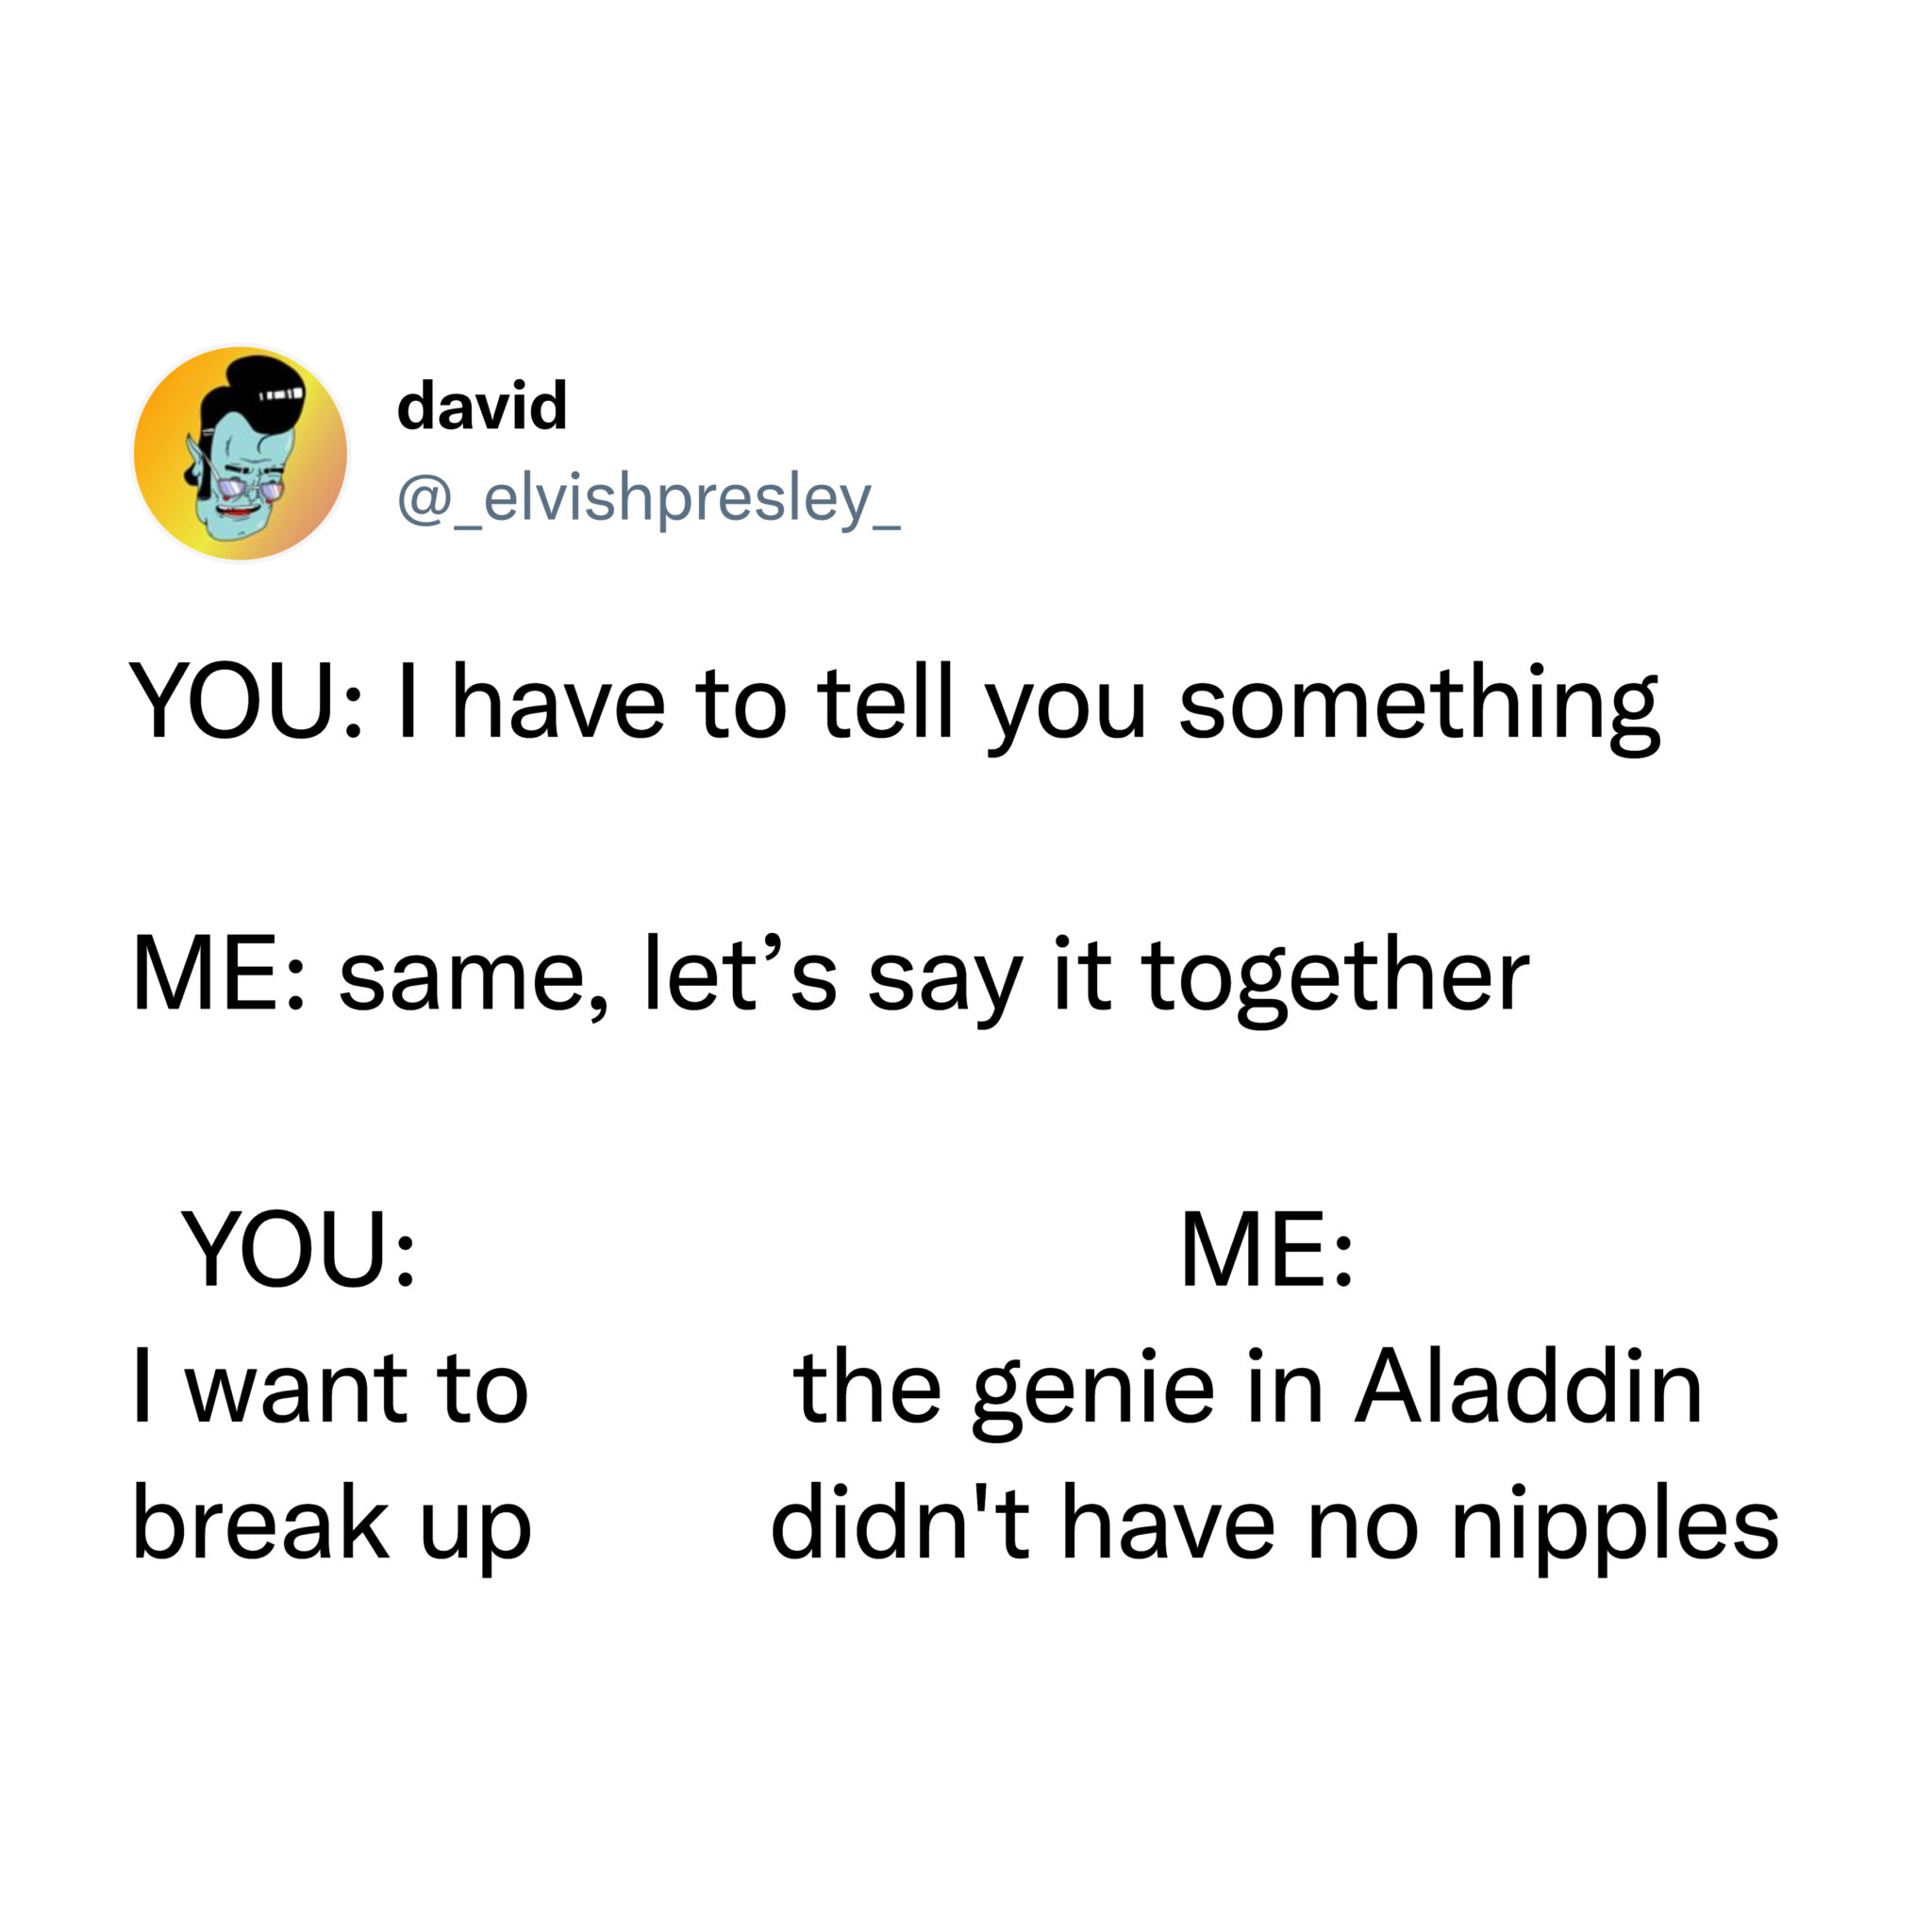 funniest tweets of the week - angle - david You I have to tell you something Me same, let's say it together You I want to break up Me the genie in Aladdin didn't have no nipples